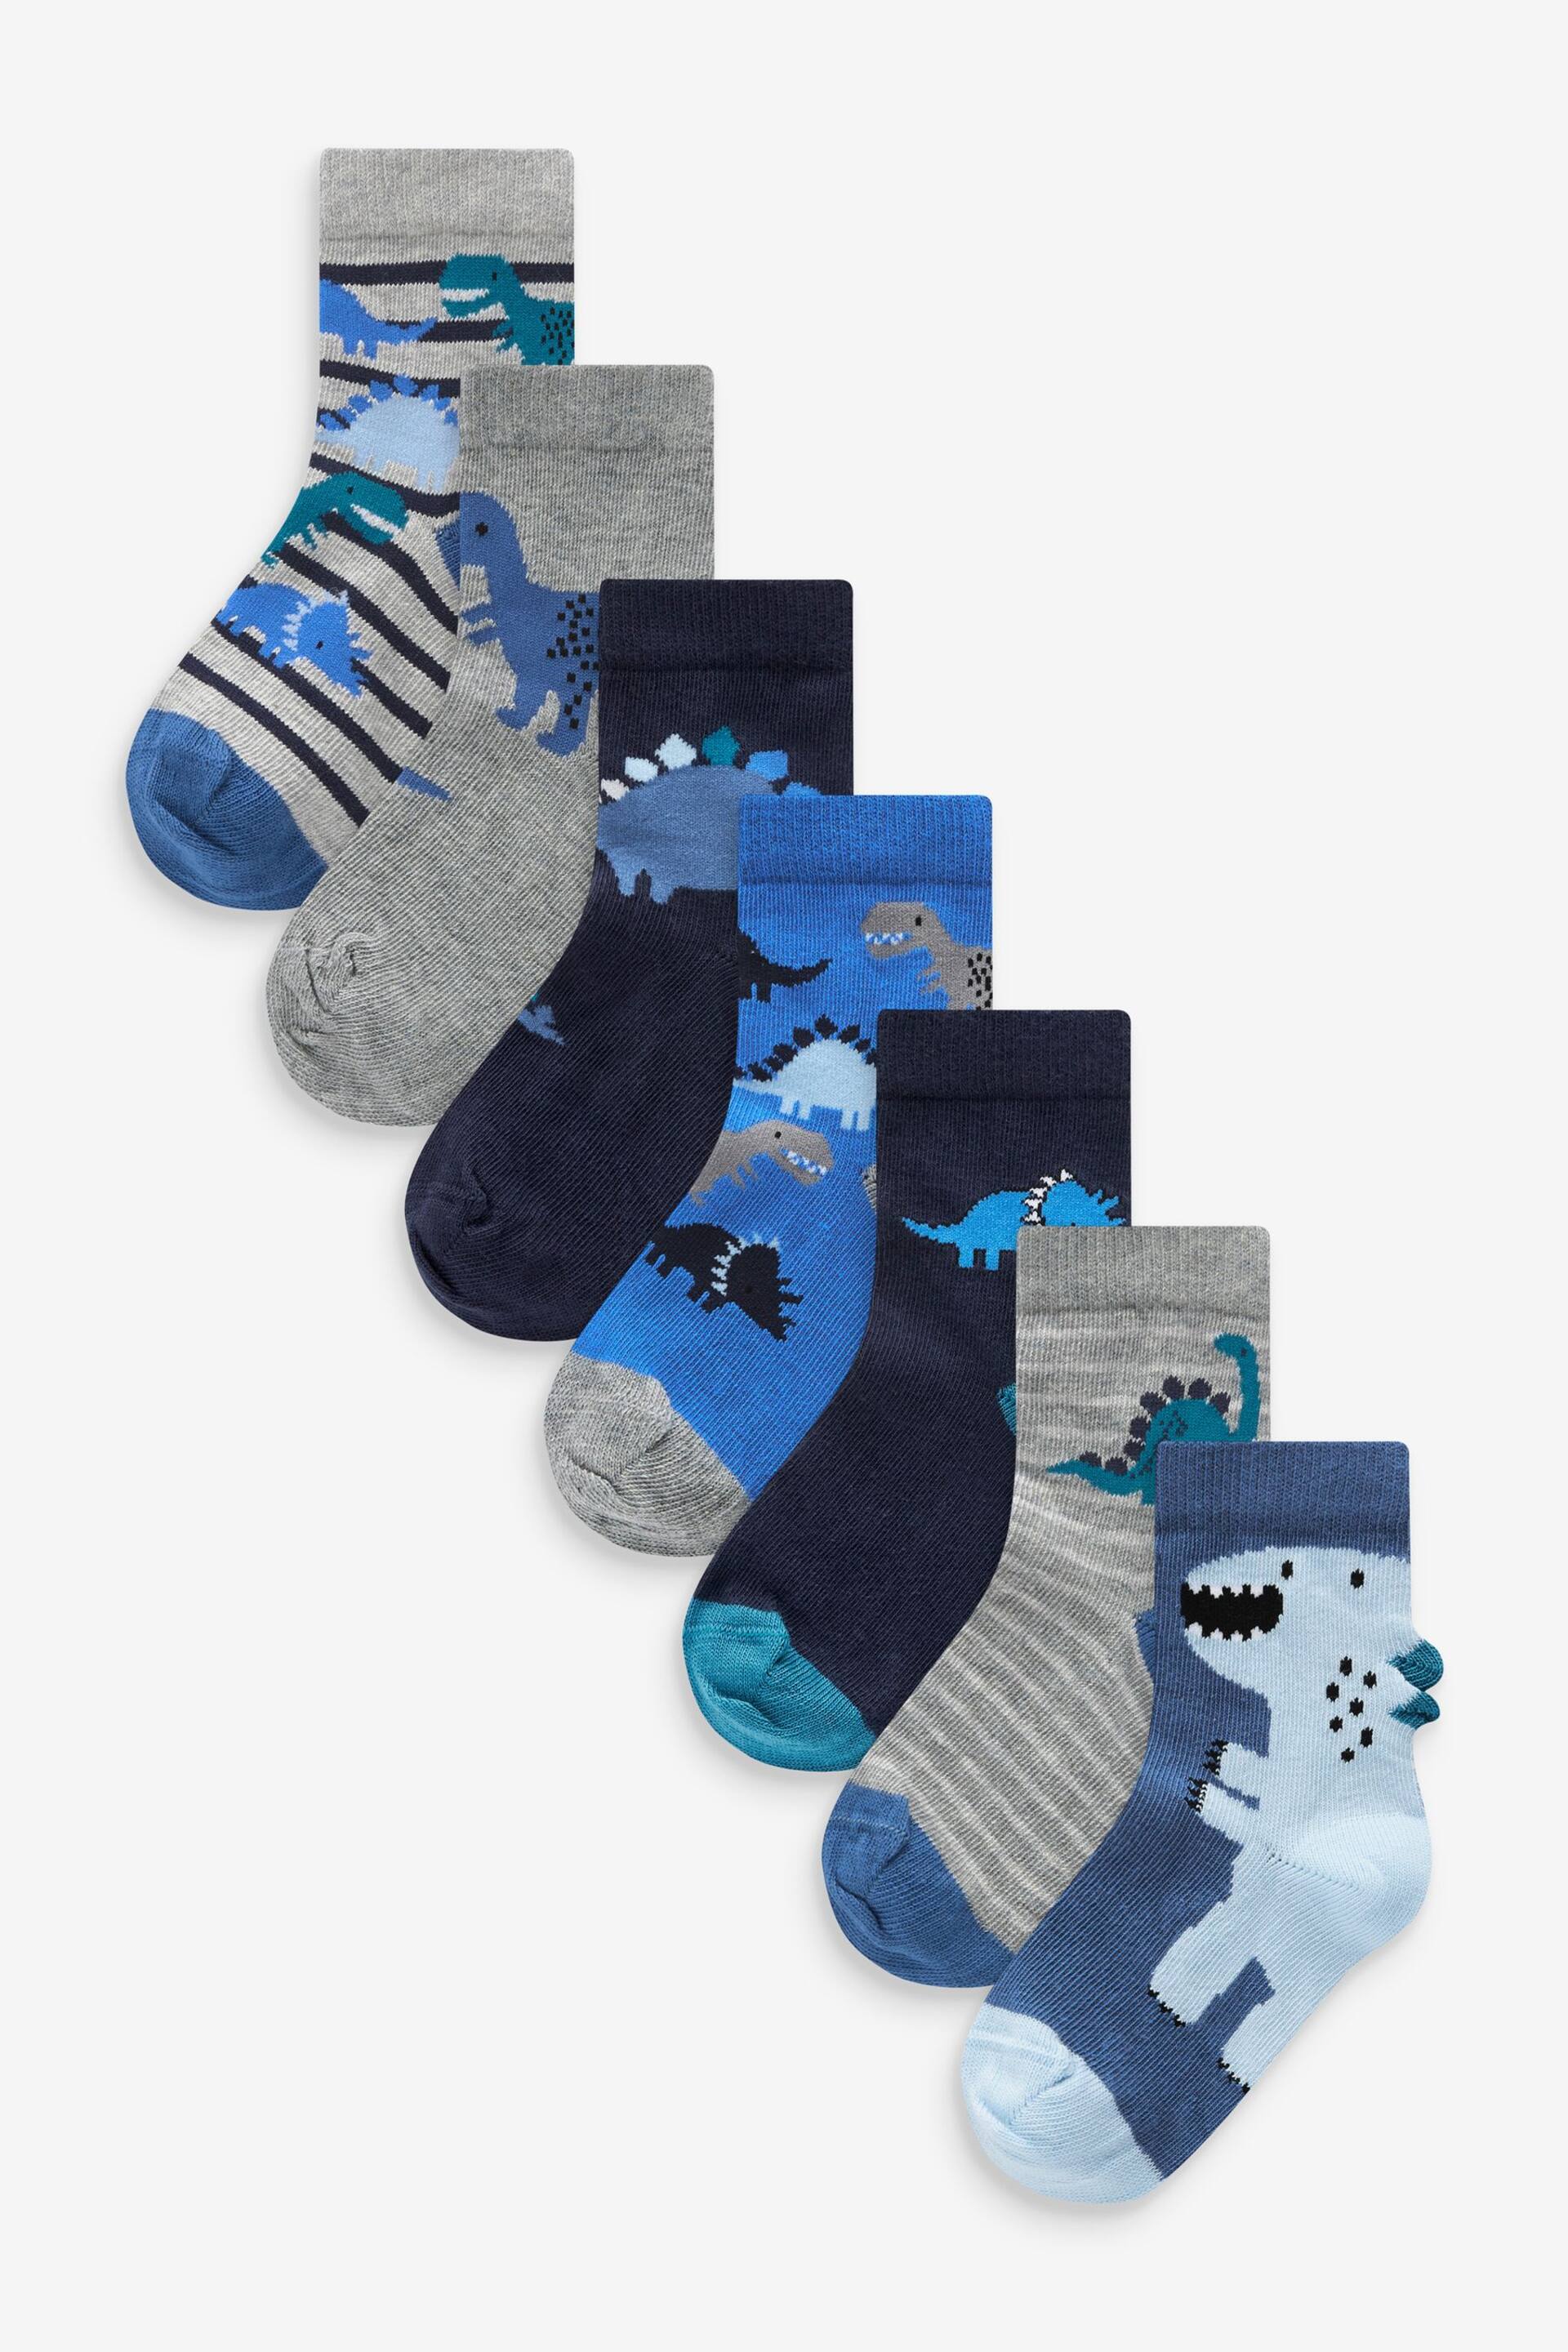 Blue Dino Cotton Rich Socks 7 Pack - Image 1 of 8